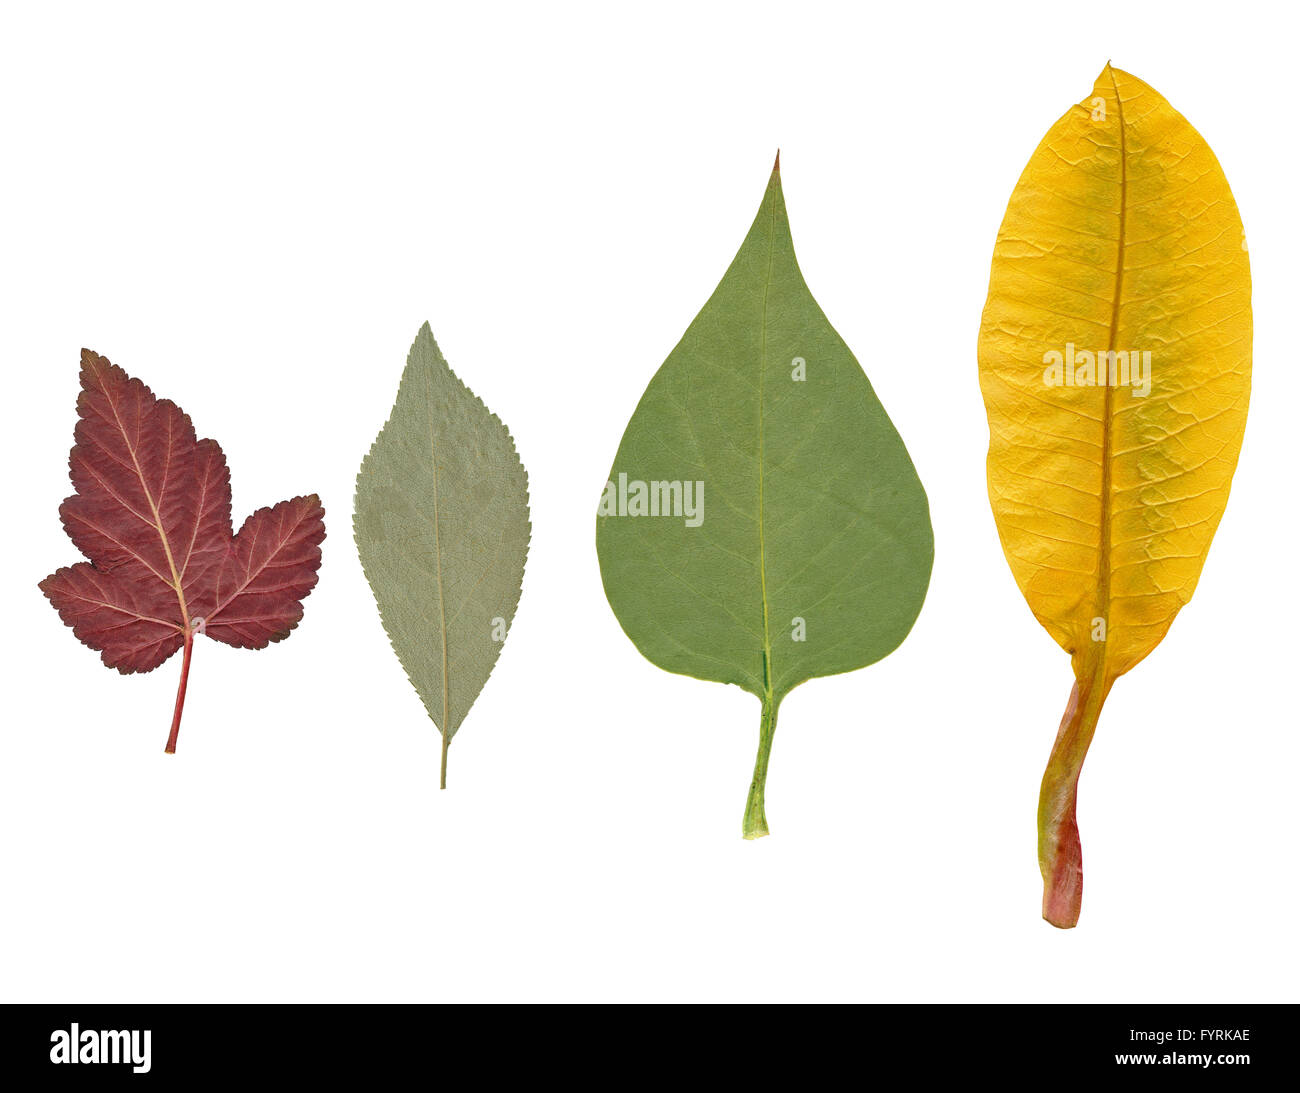 Dried leaves of various plants. Stock Photo